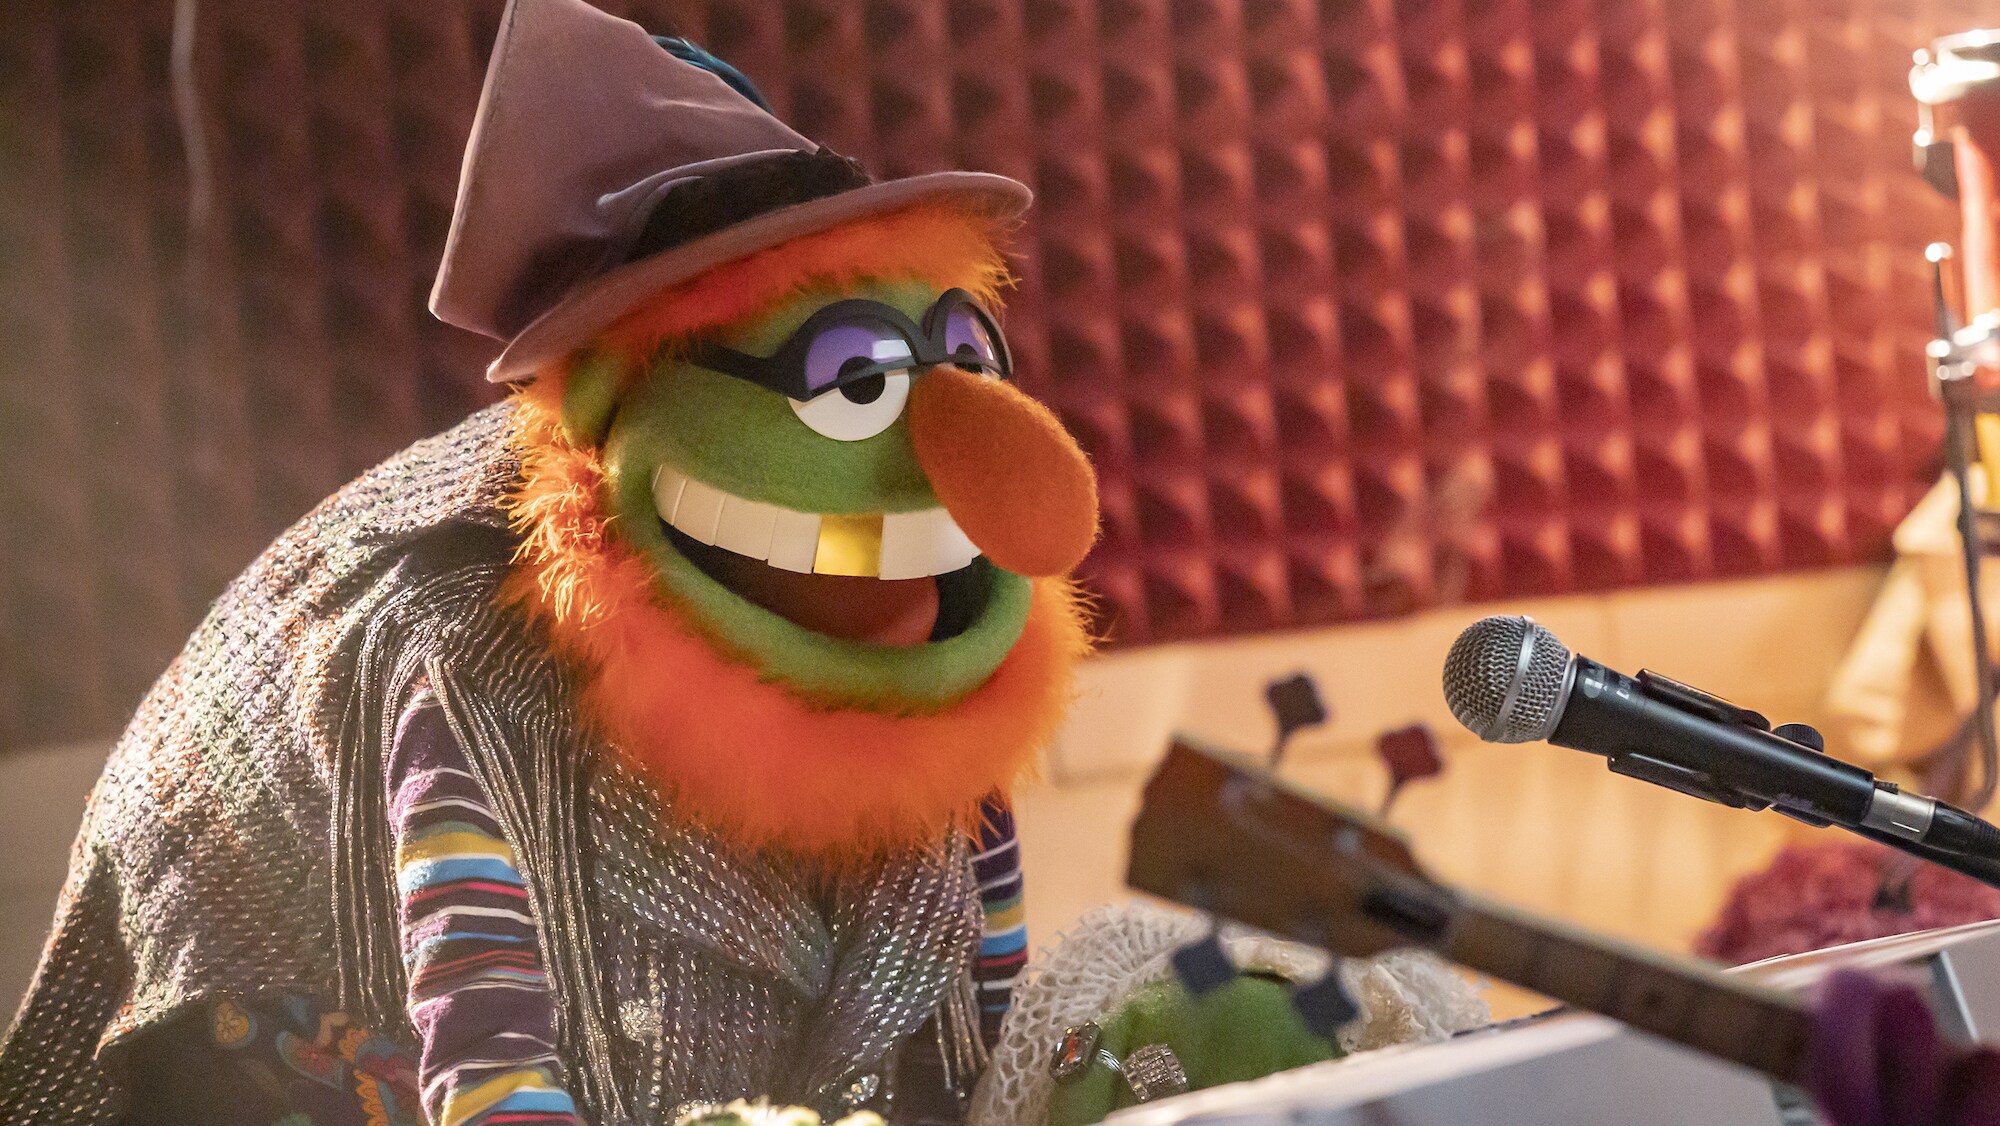 THE MUPPETS MAYHEM - “Track 4: The Times They Are A-Changin” (Disney/Mitch Haaseth) DR. TEETH